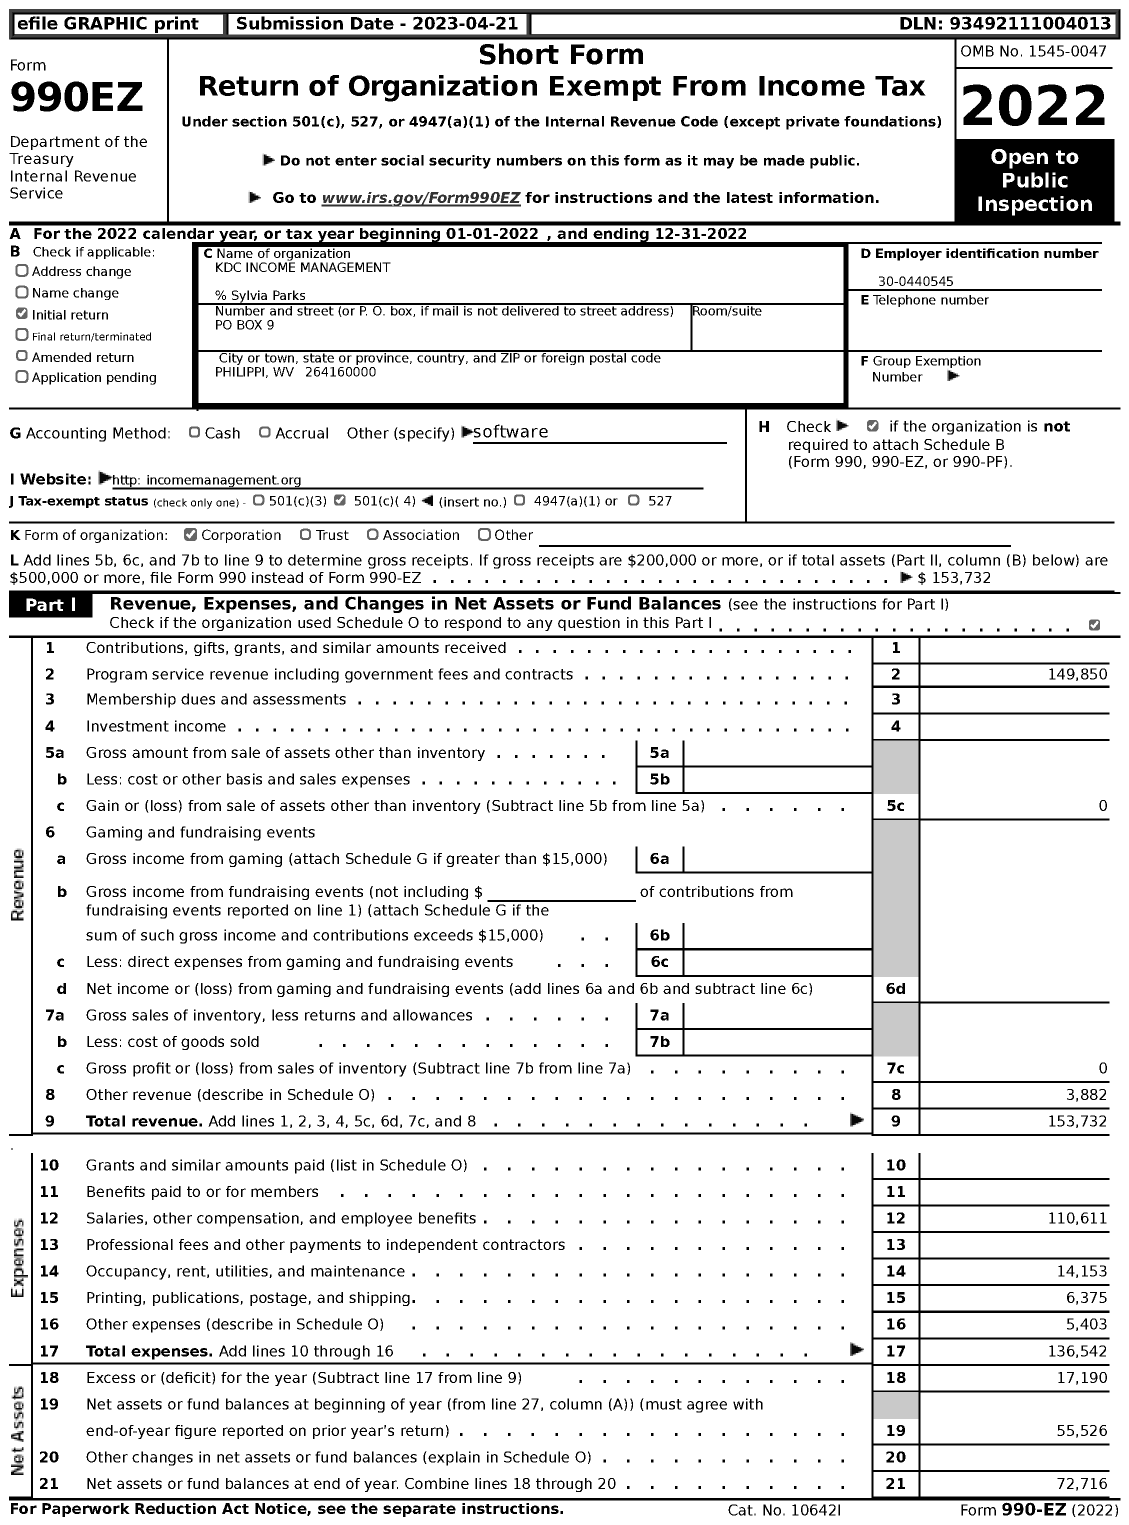 Image of first page of 2022 Form 990EZ for KDC Income Management